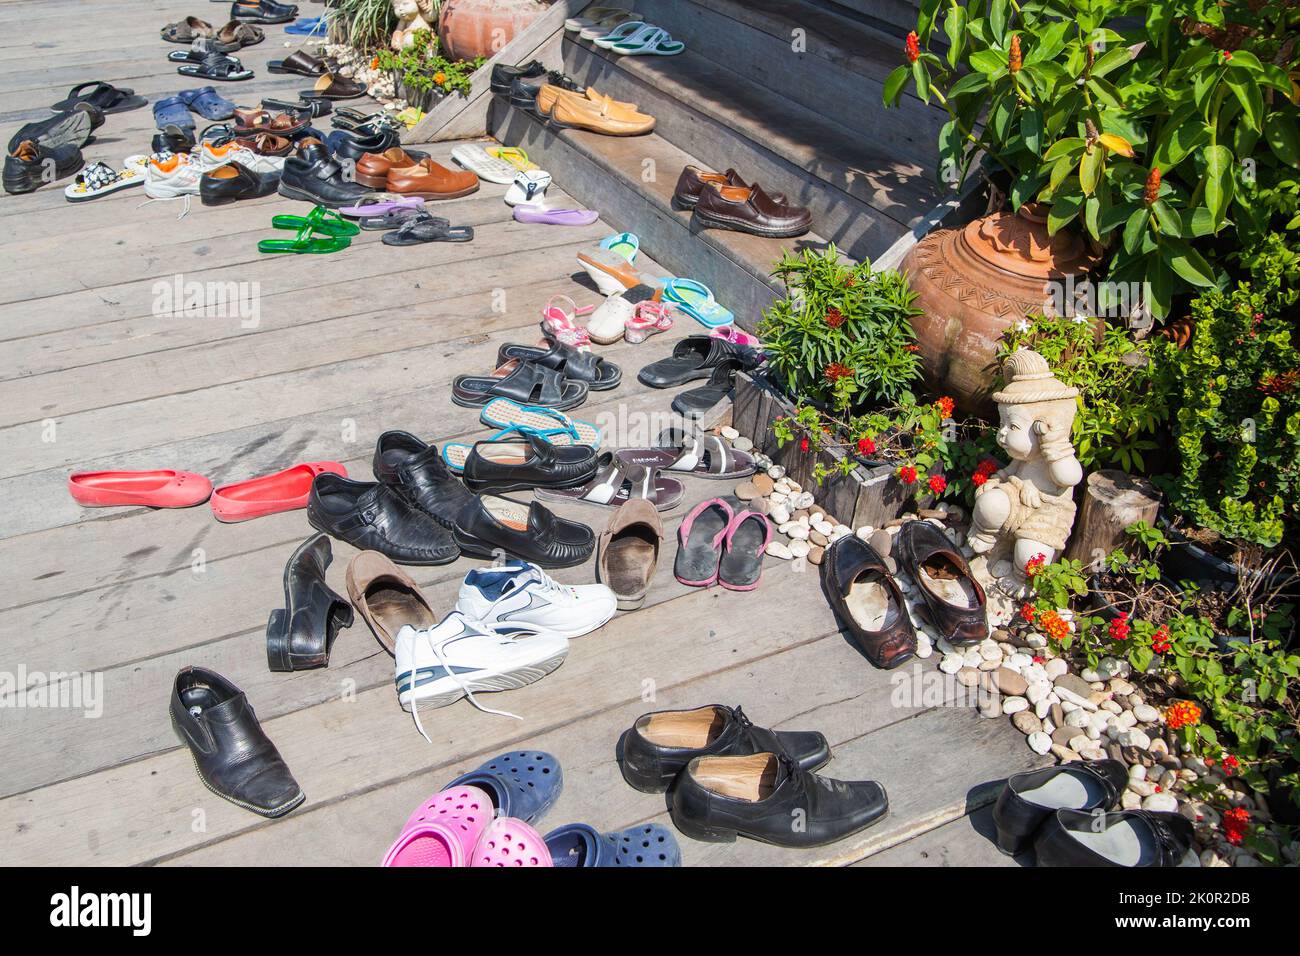 Pattaya, Thailand - December 6, 2009: Taken off shoes by the entrance to buddhist temple in Thailand Stock Photo